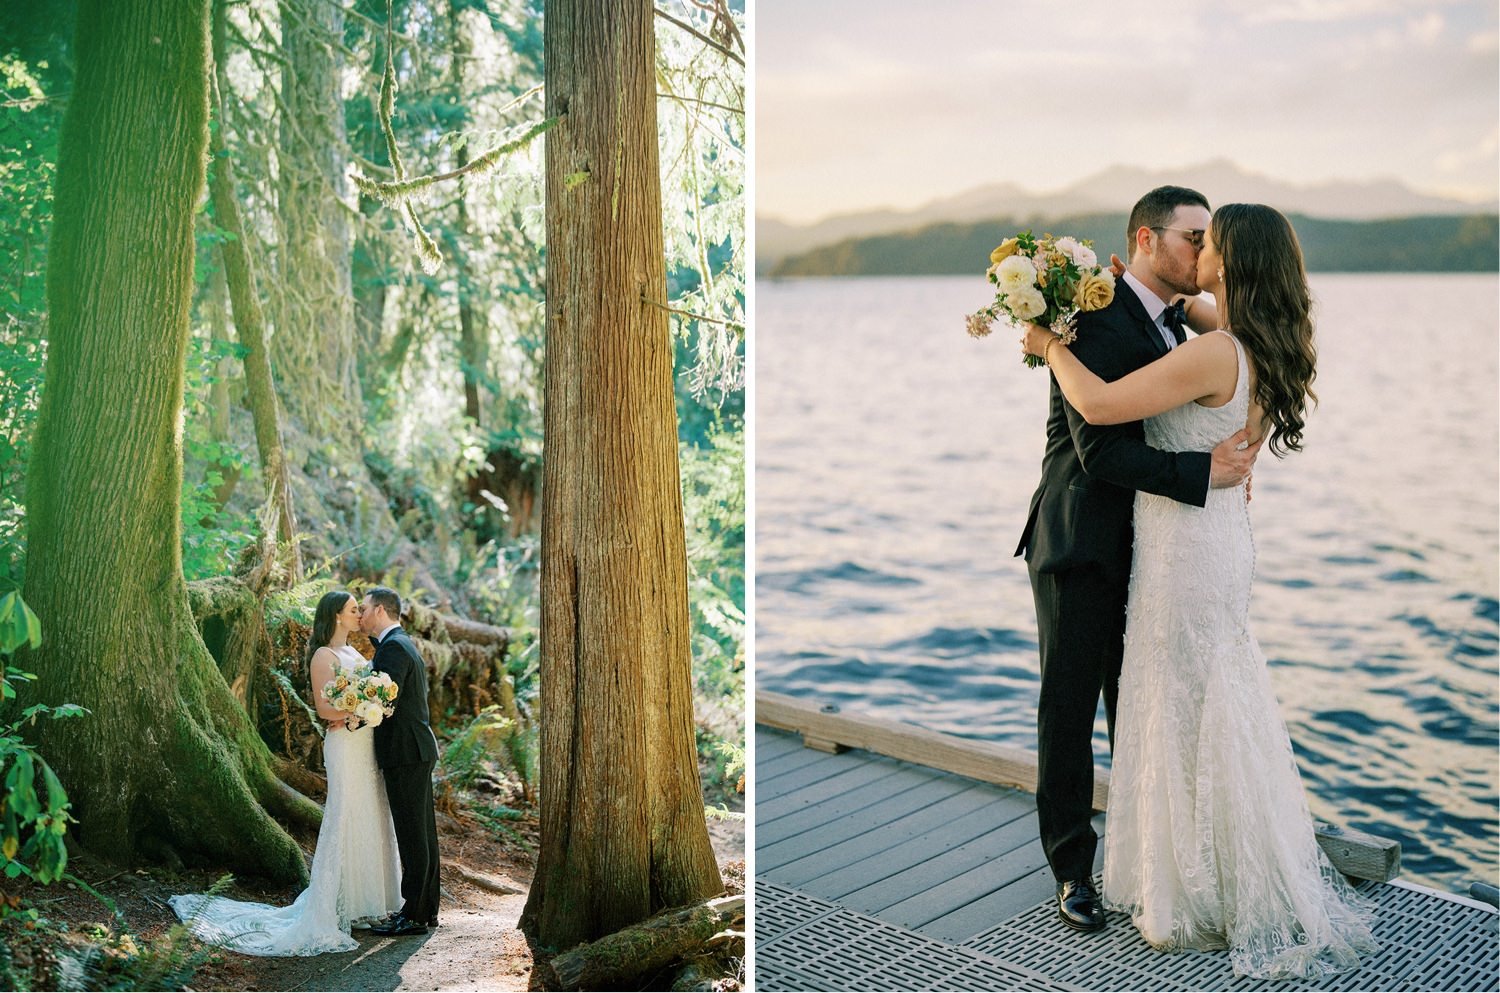 063_Soft neutral colored wedding at Alderbrook Resort by Ryan Flynn with A. Renee events .jpg